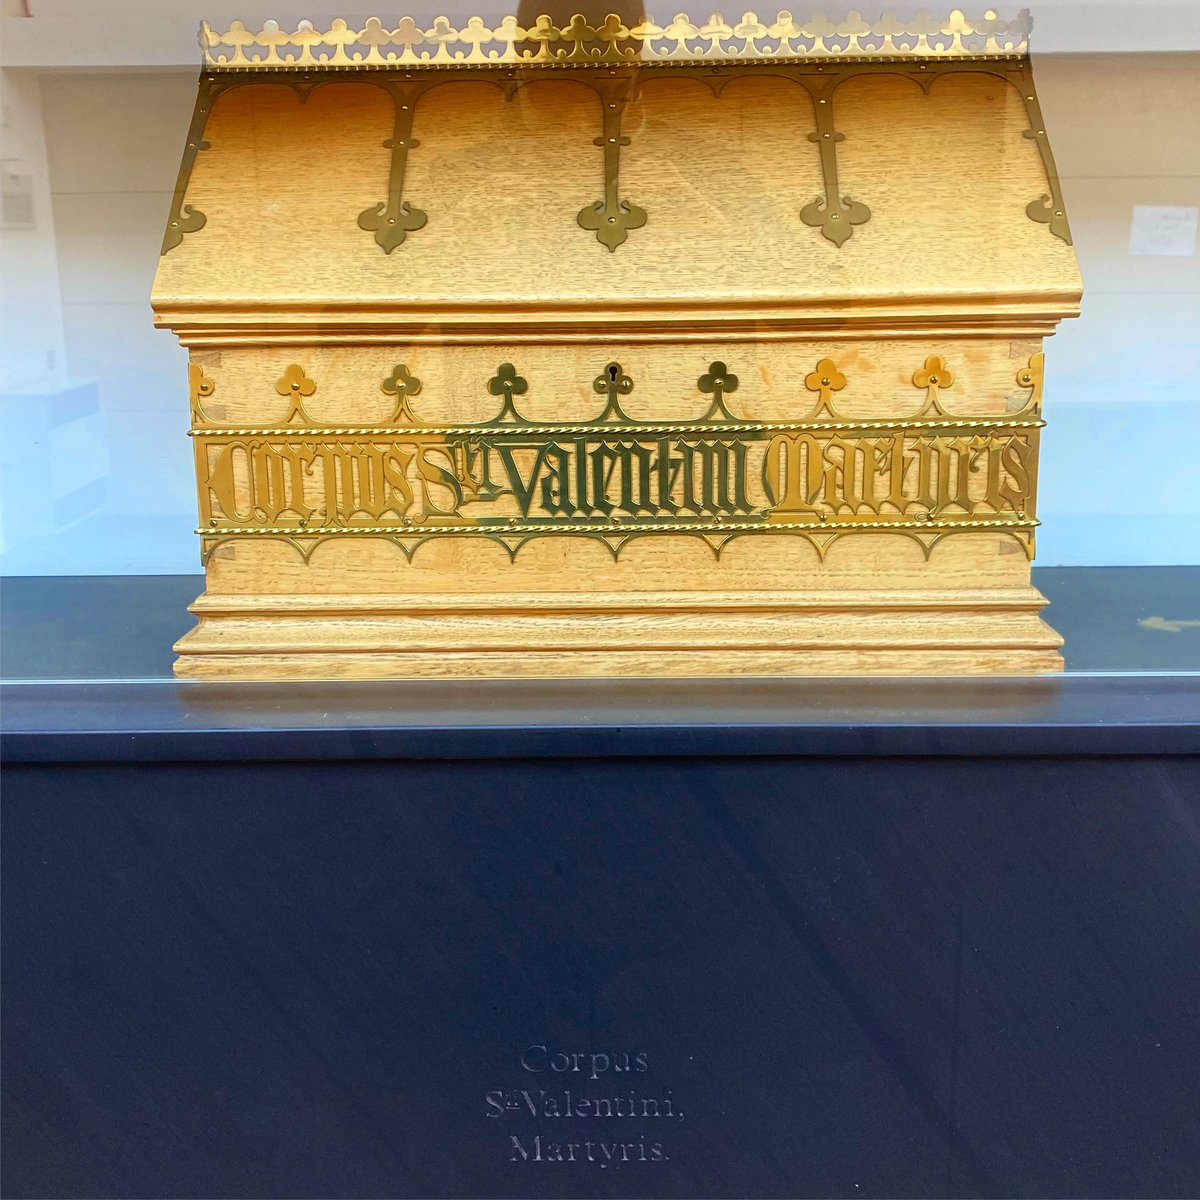 Happy Valentines Day! Here is the reliquary of St Valentine found in Blessed John Duns Scotus Church in the Gorbals! ❤️ #valentinesday #valentines #happyvalentinesday #stvalentine #catholictwitter #gorbals #glasgow